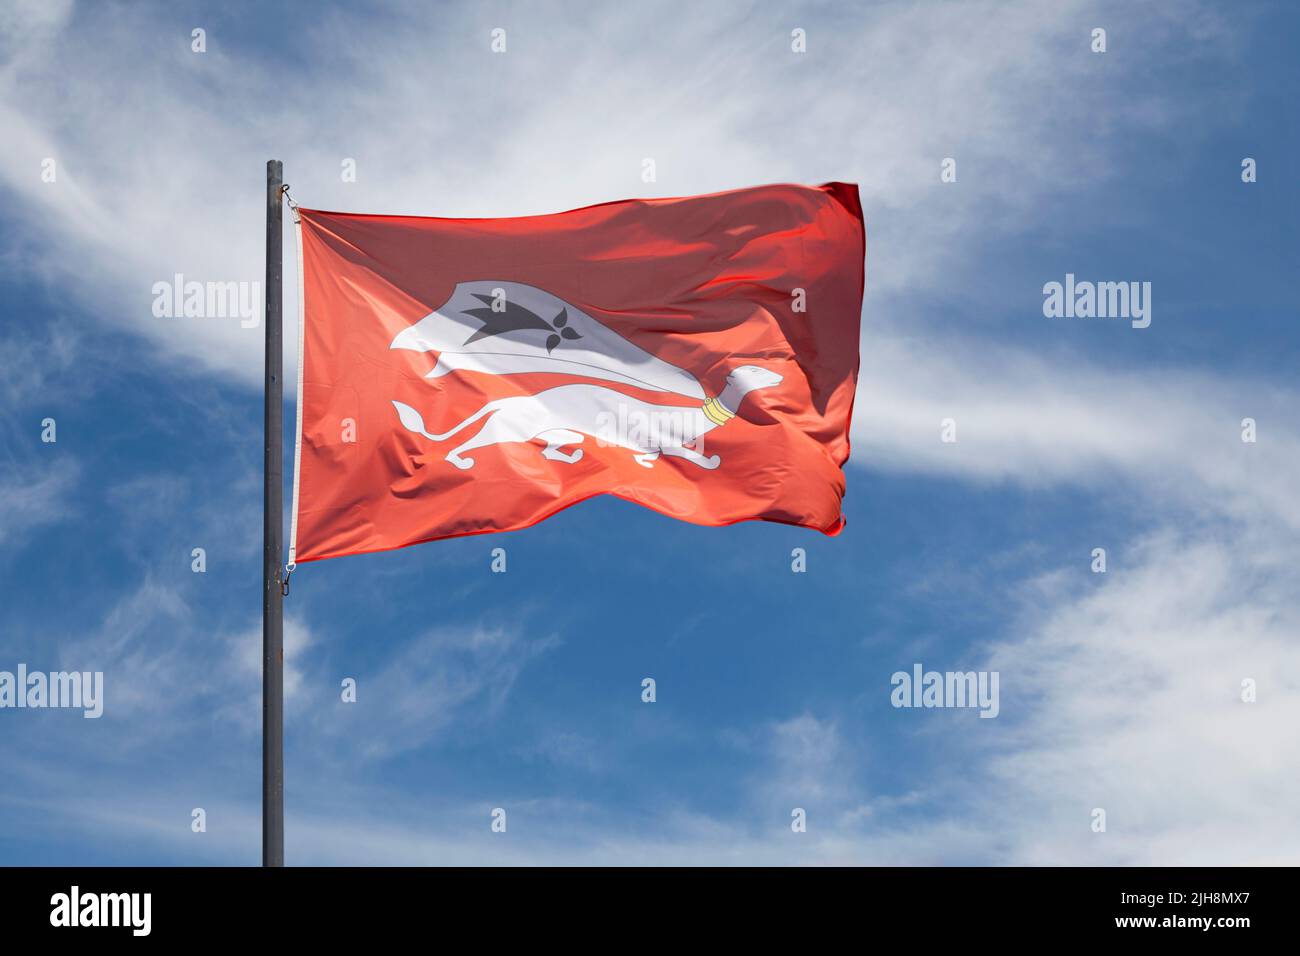 Flag of the city of Vannes waving un mid air. Stock Photo